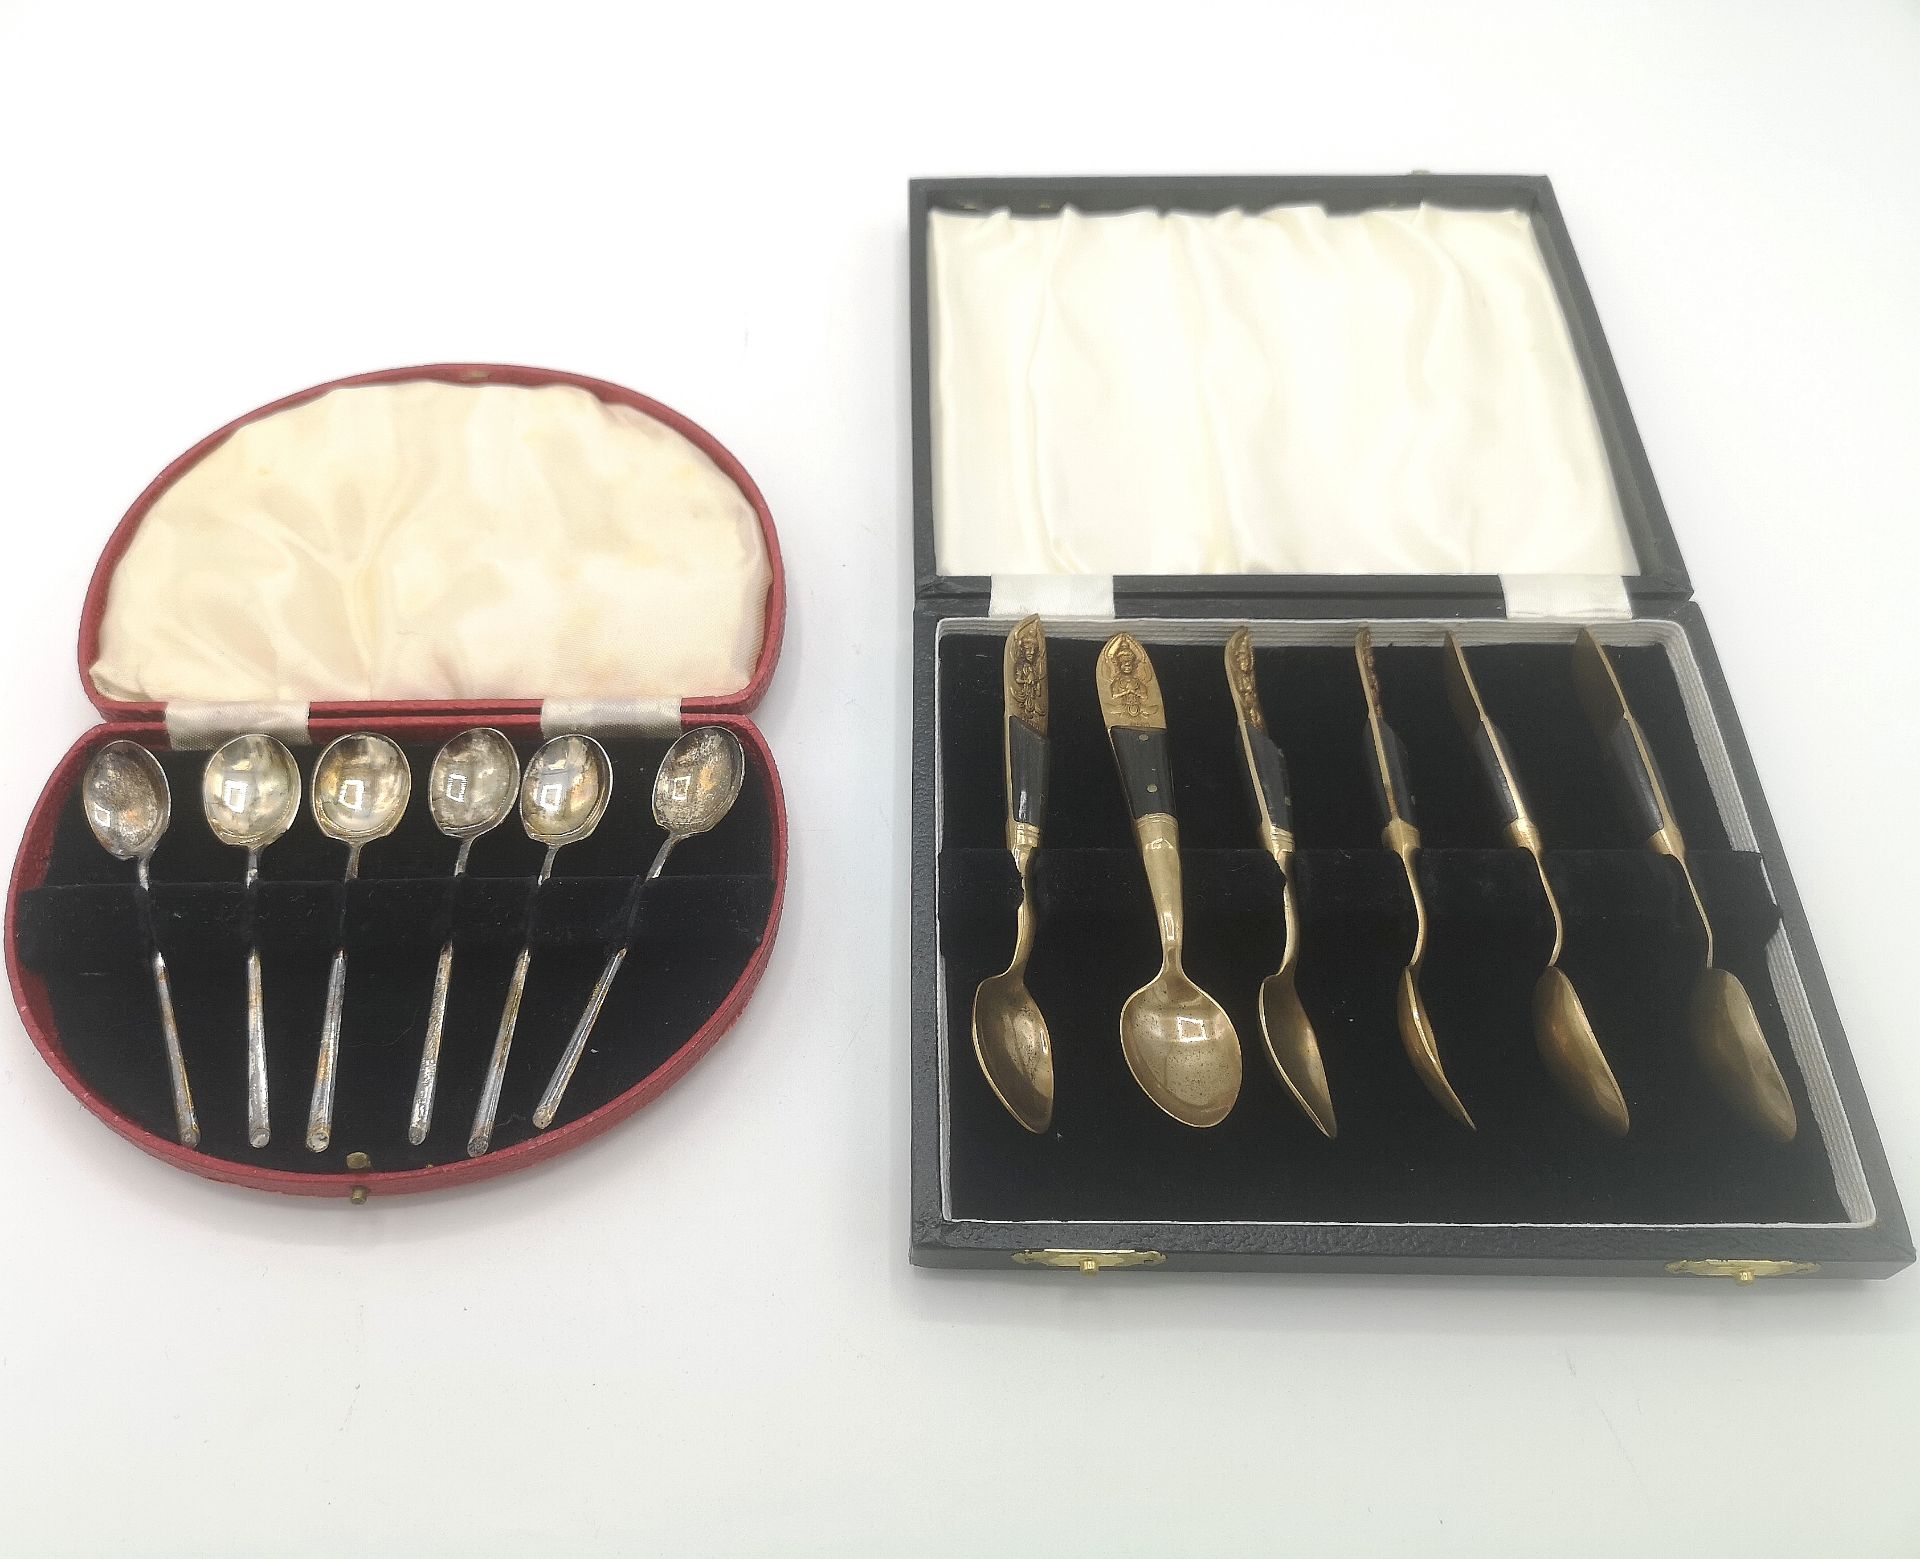 Boxed set of silver coffee spoons